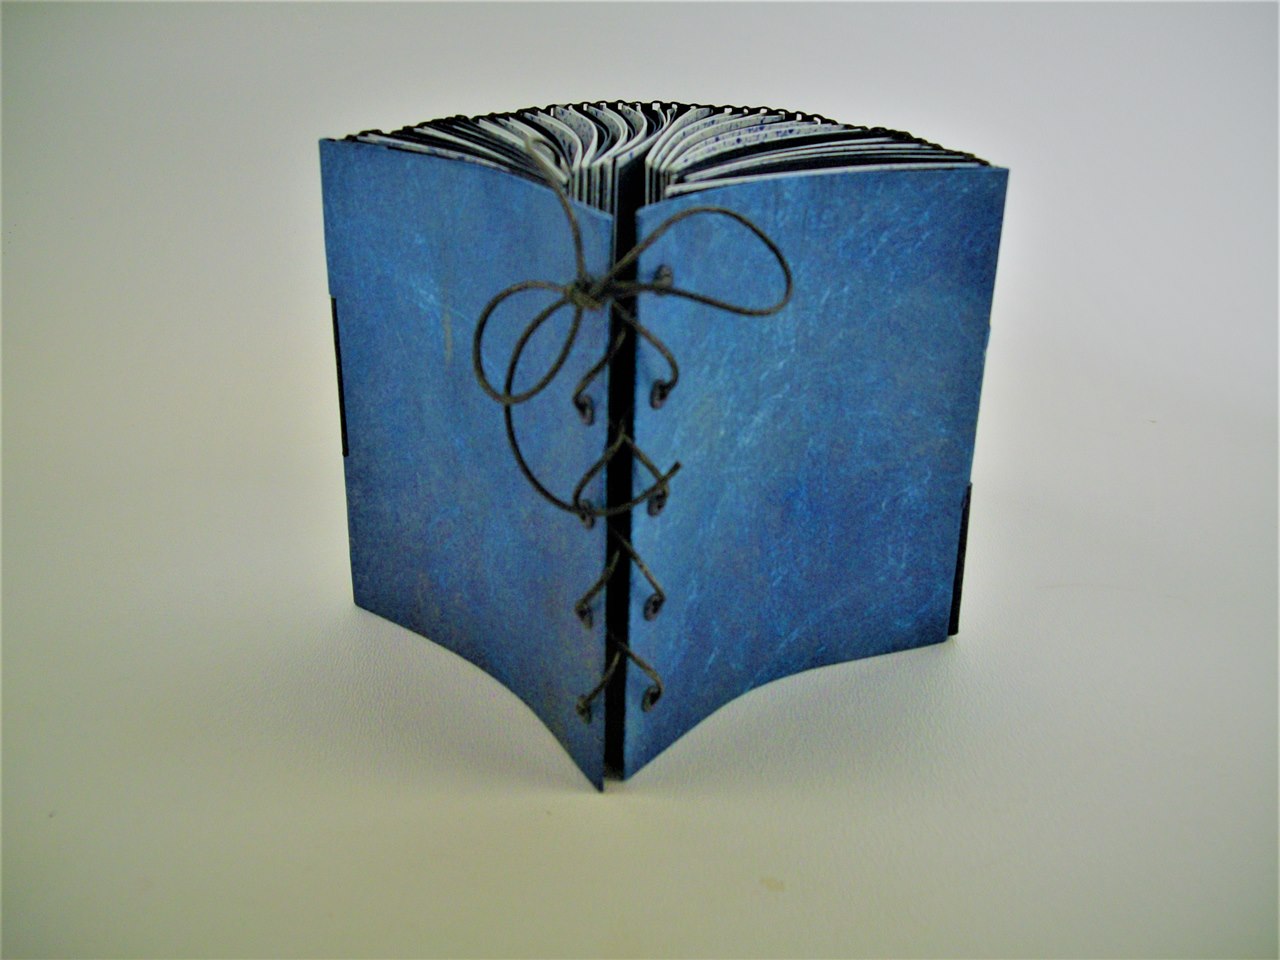 hinged book - from workshop (3)